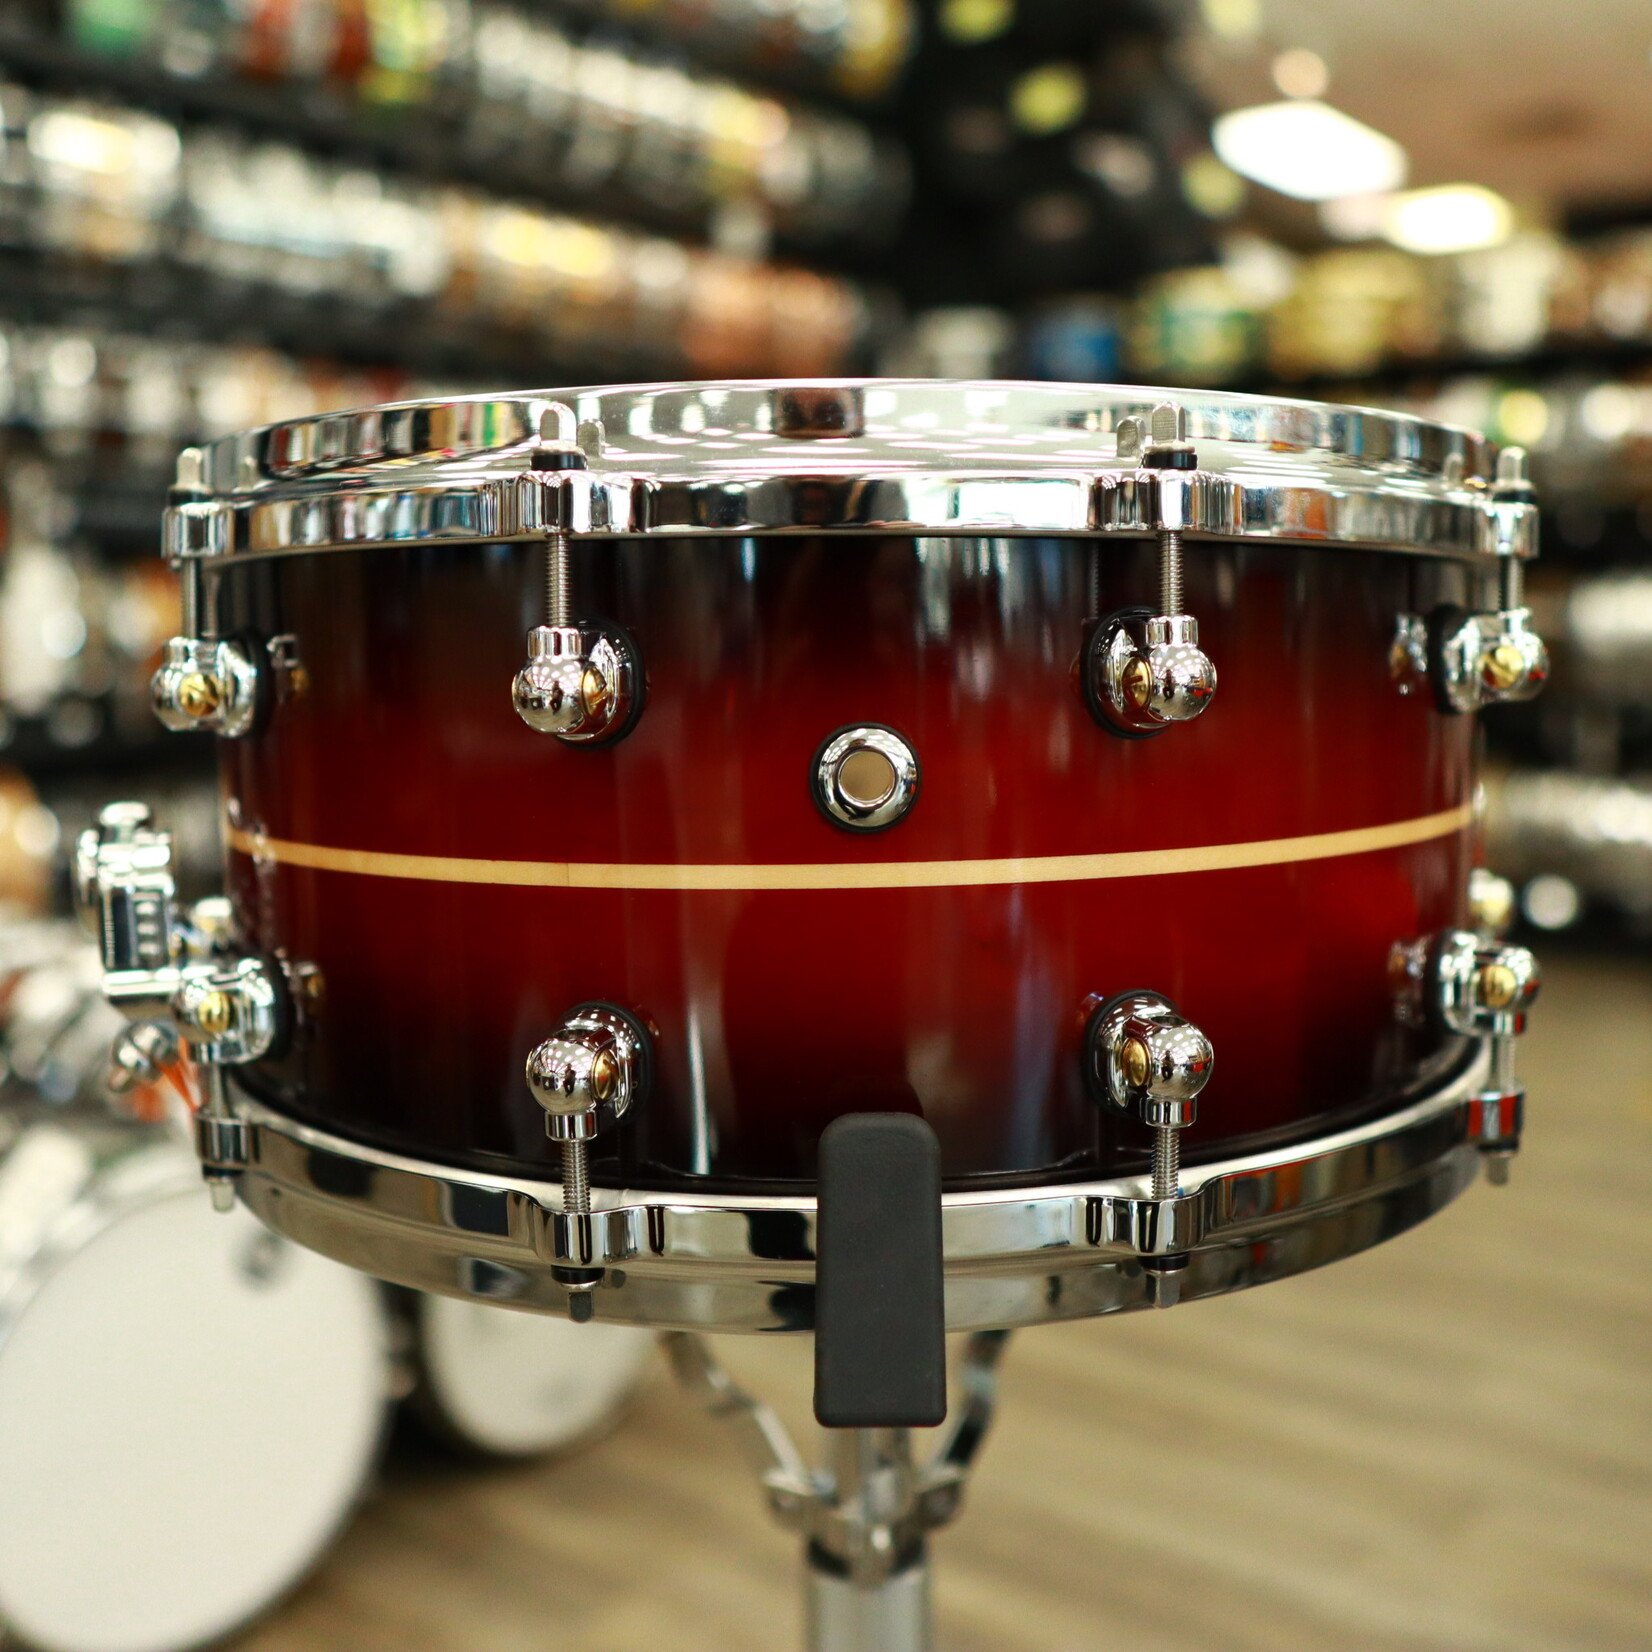 Pearl Pearl Reference One 6.5x14" Snare Drum (Played by Omar Hakim) (Red Burst Stripe)